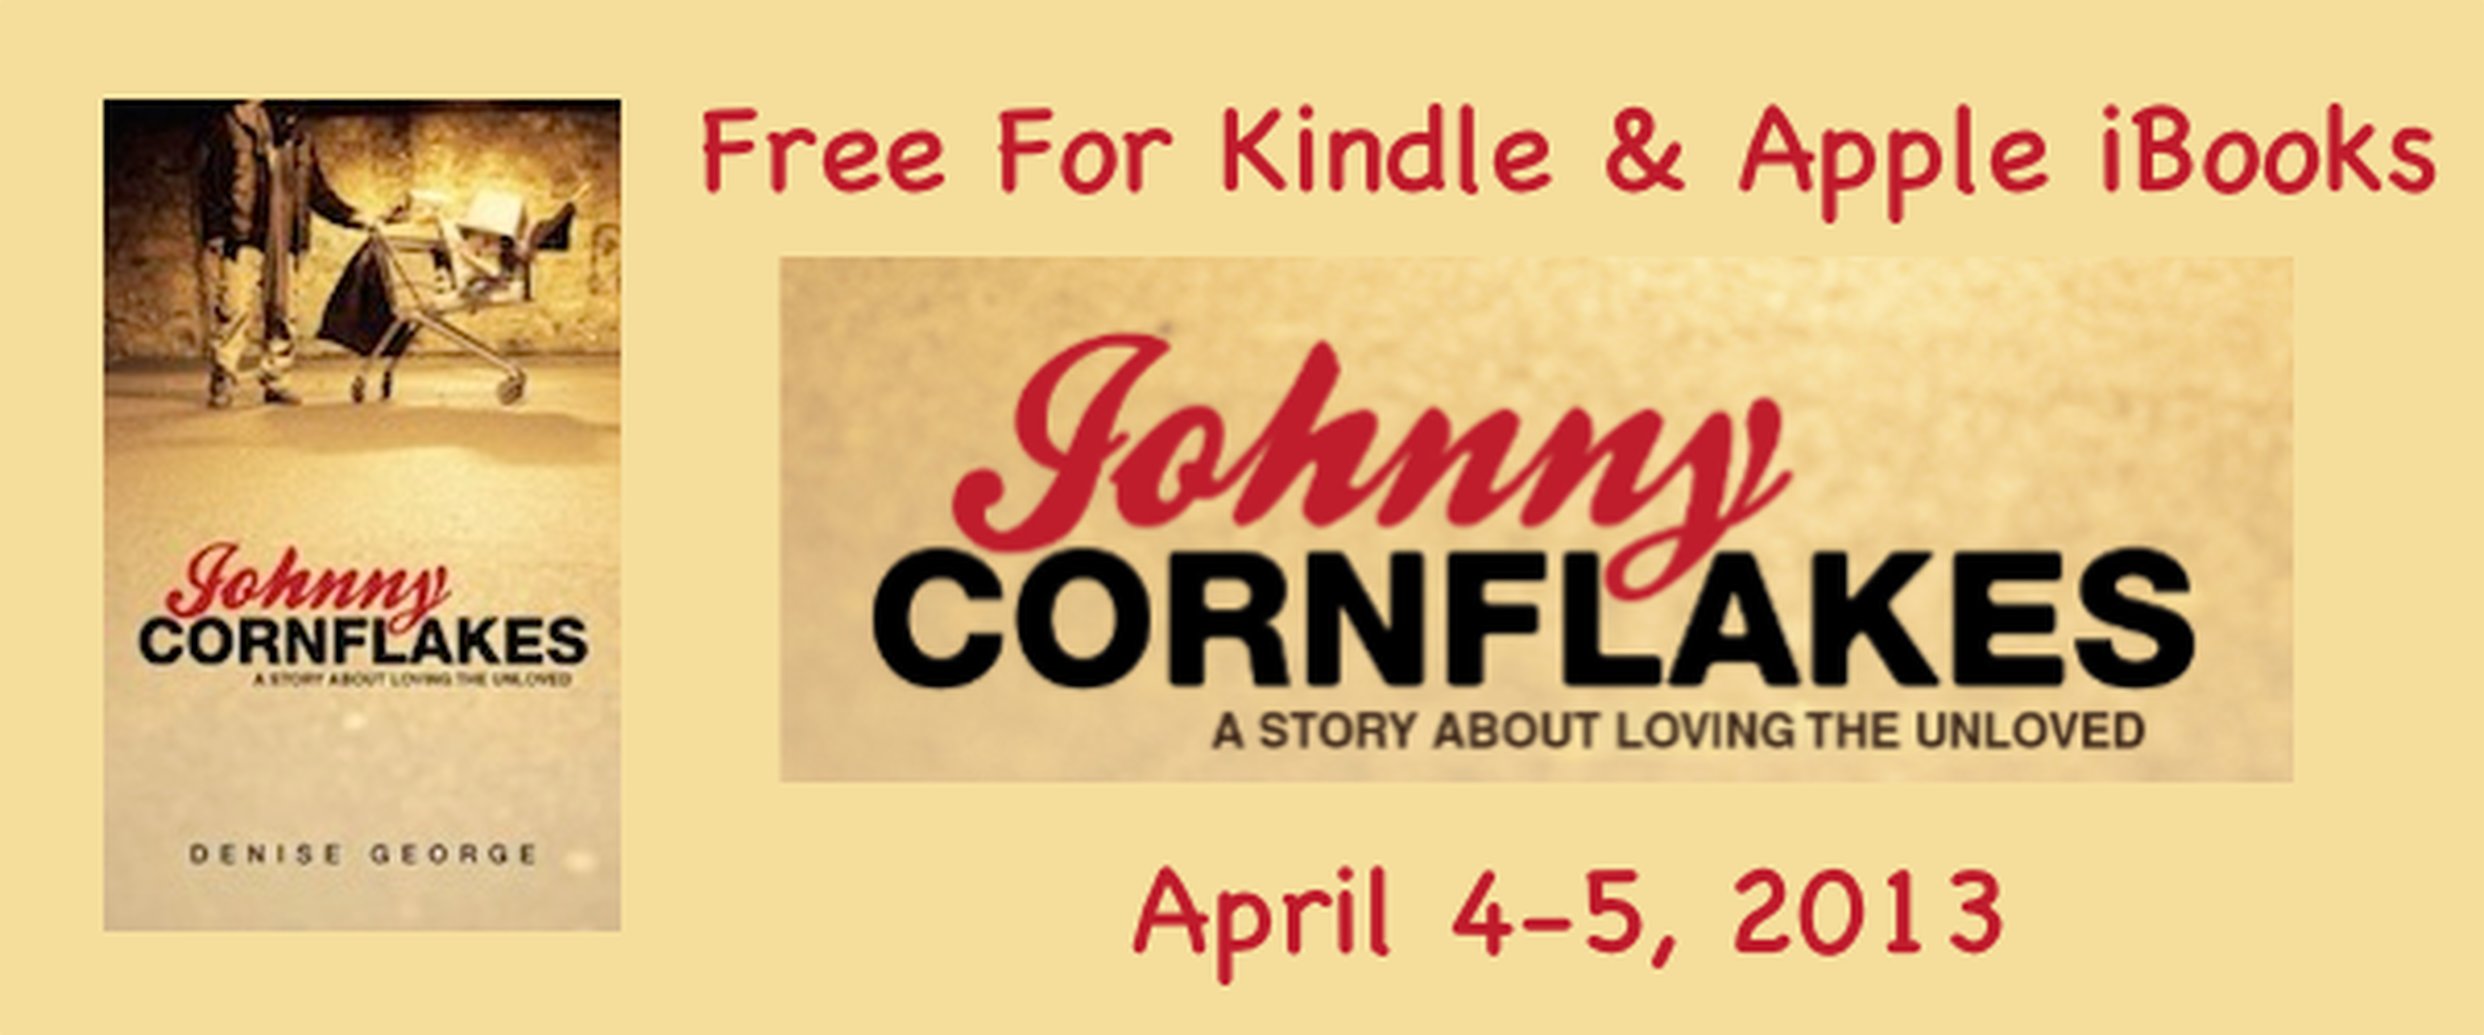 Free for Kindle & Apple iBooks - Johnny Cornflakes by Denise George